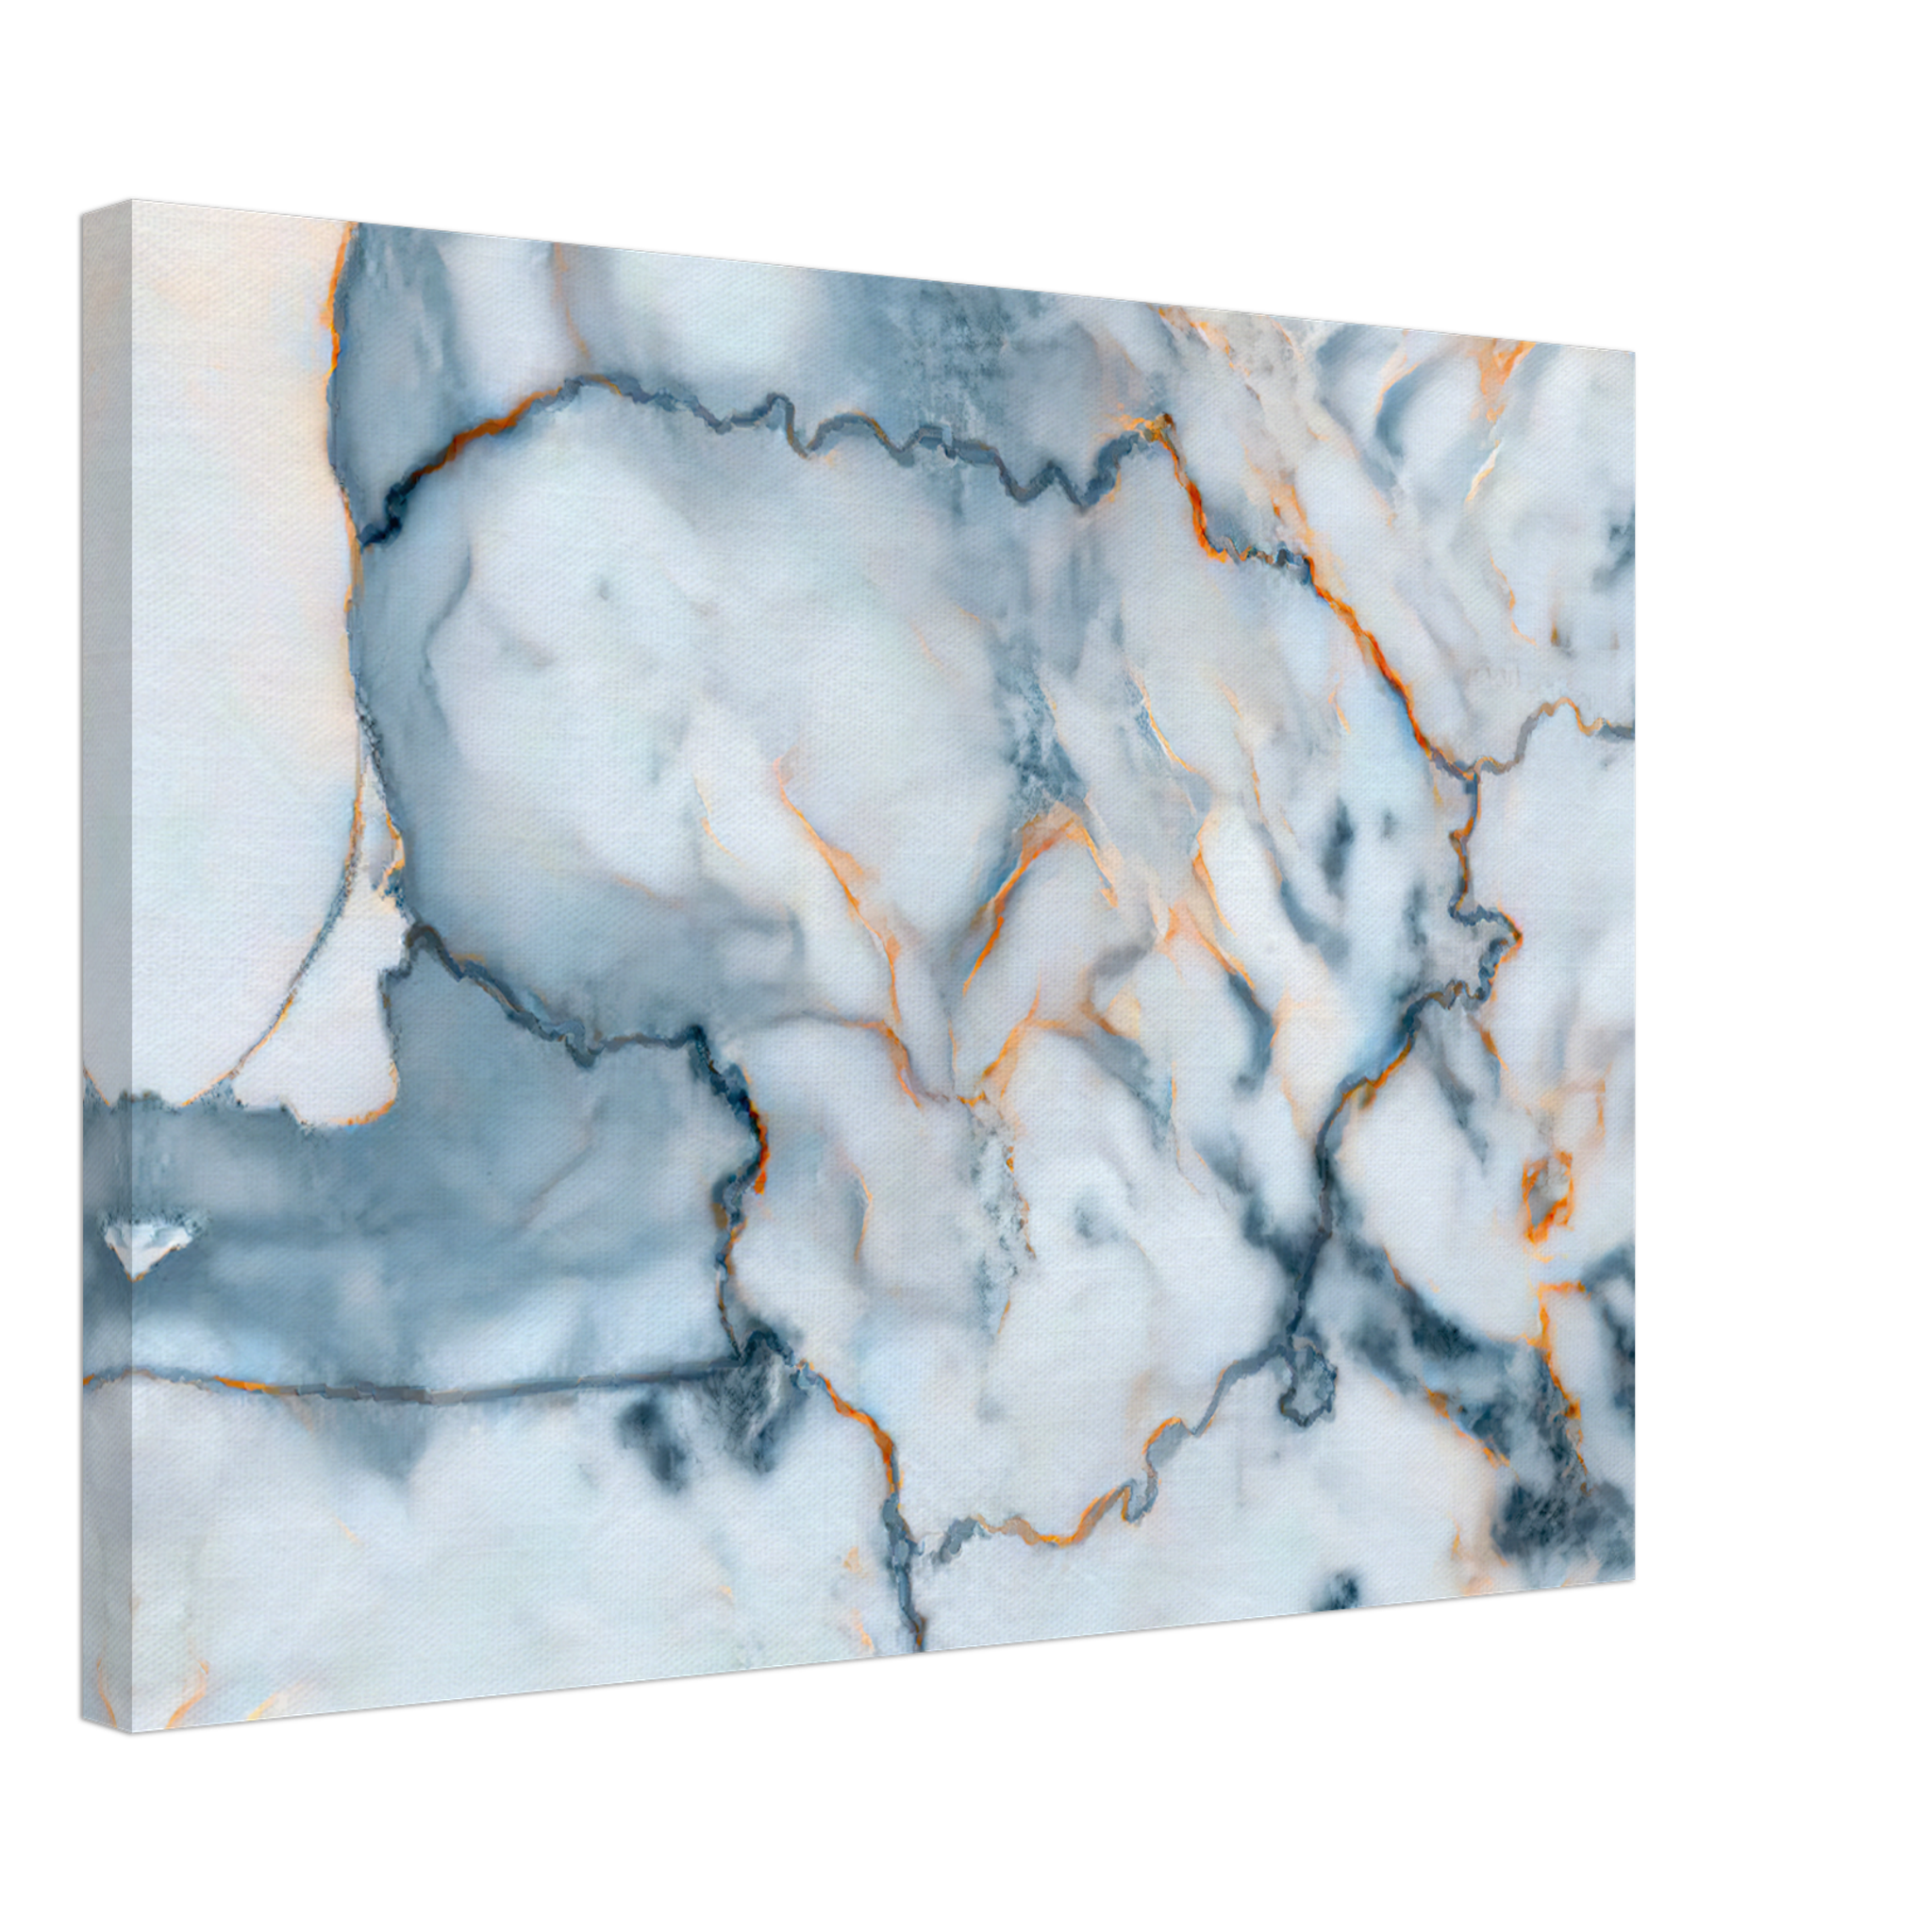 Lithuania Marble Map Canvas